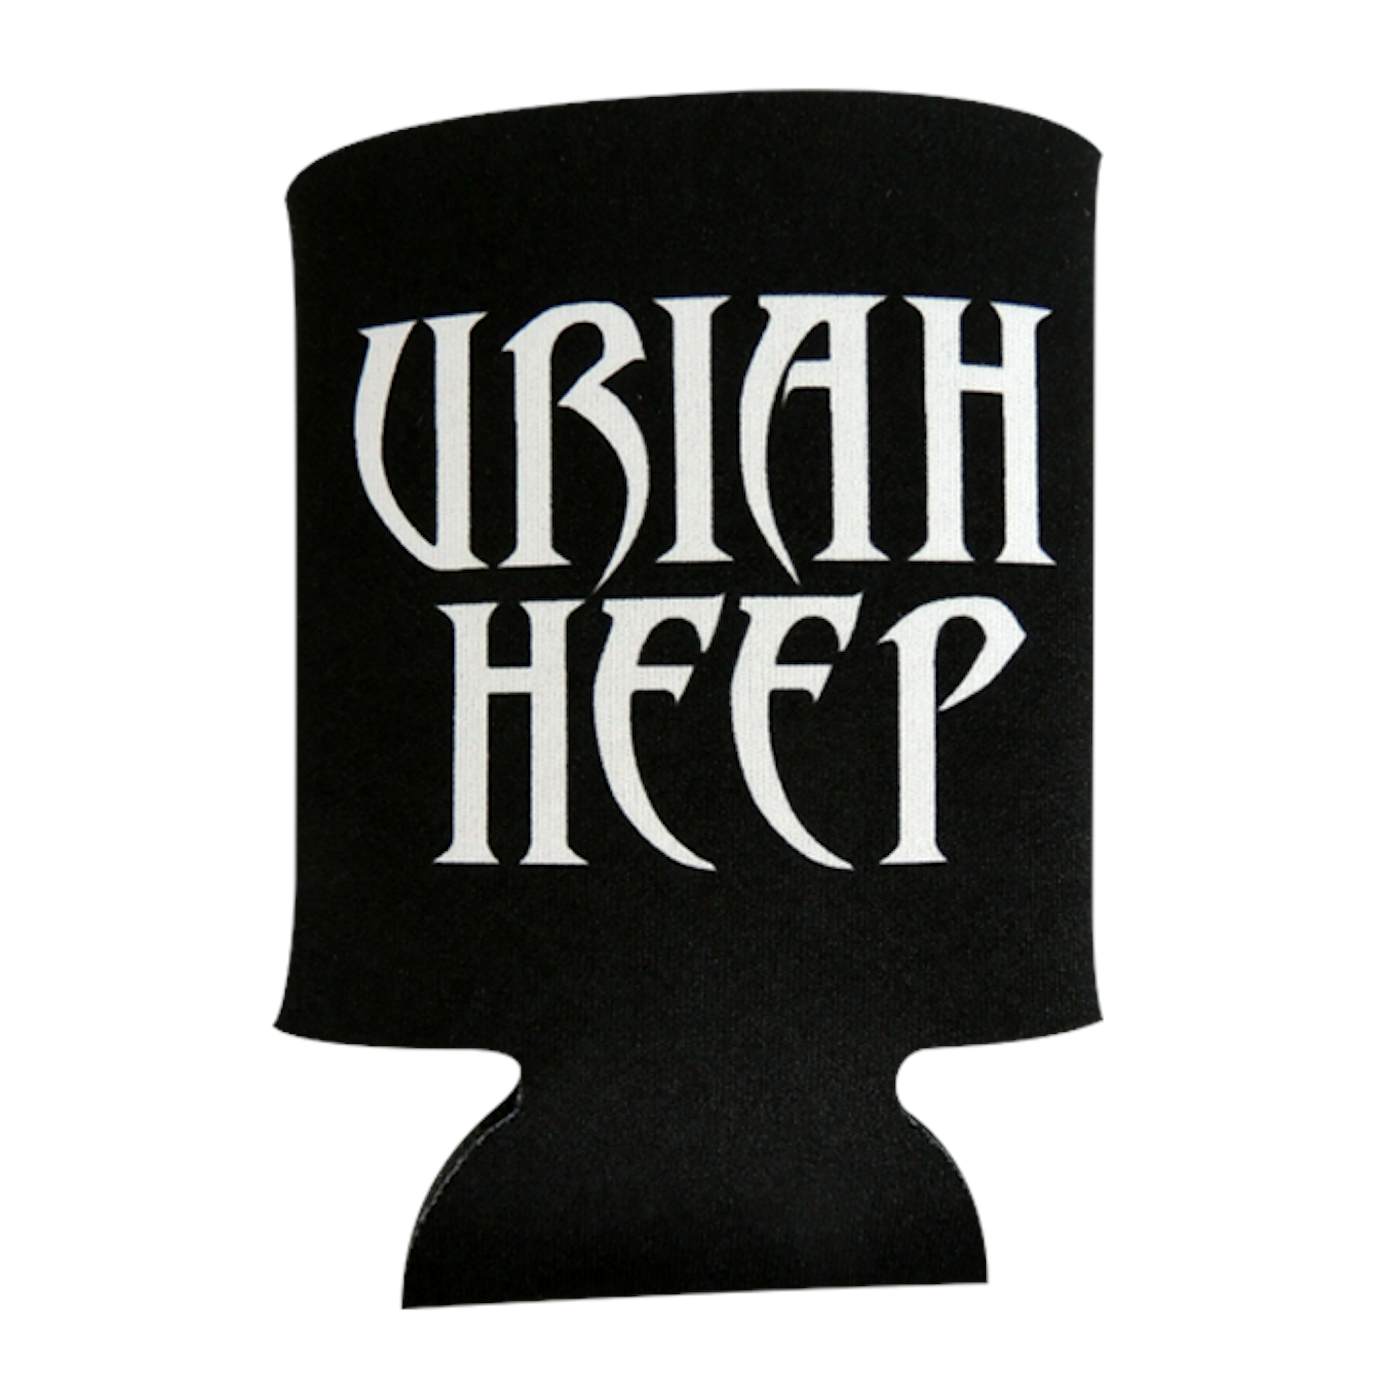 URIAH HEEP DEMONS AND WIZARDS - Best Rock T-shirts